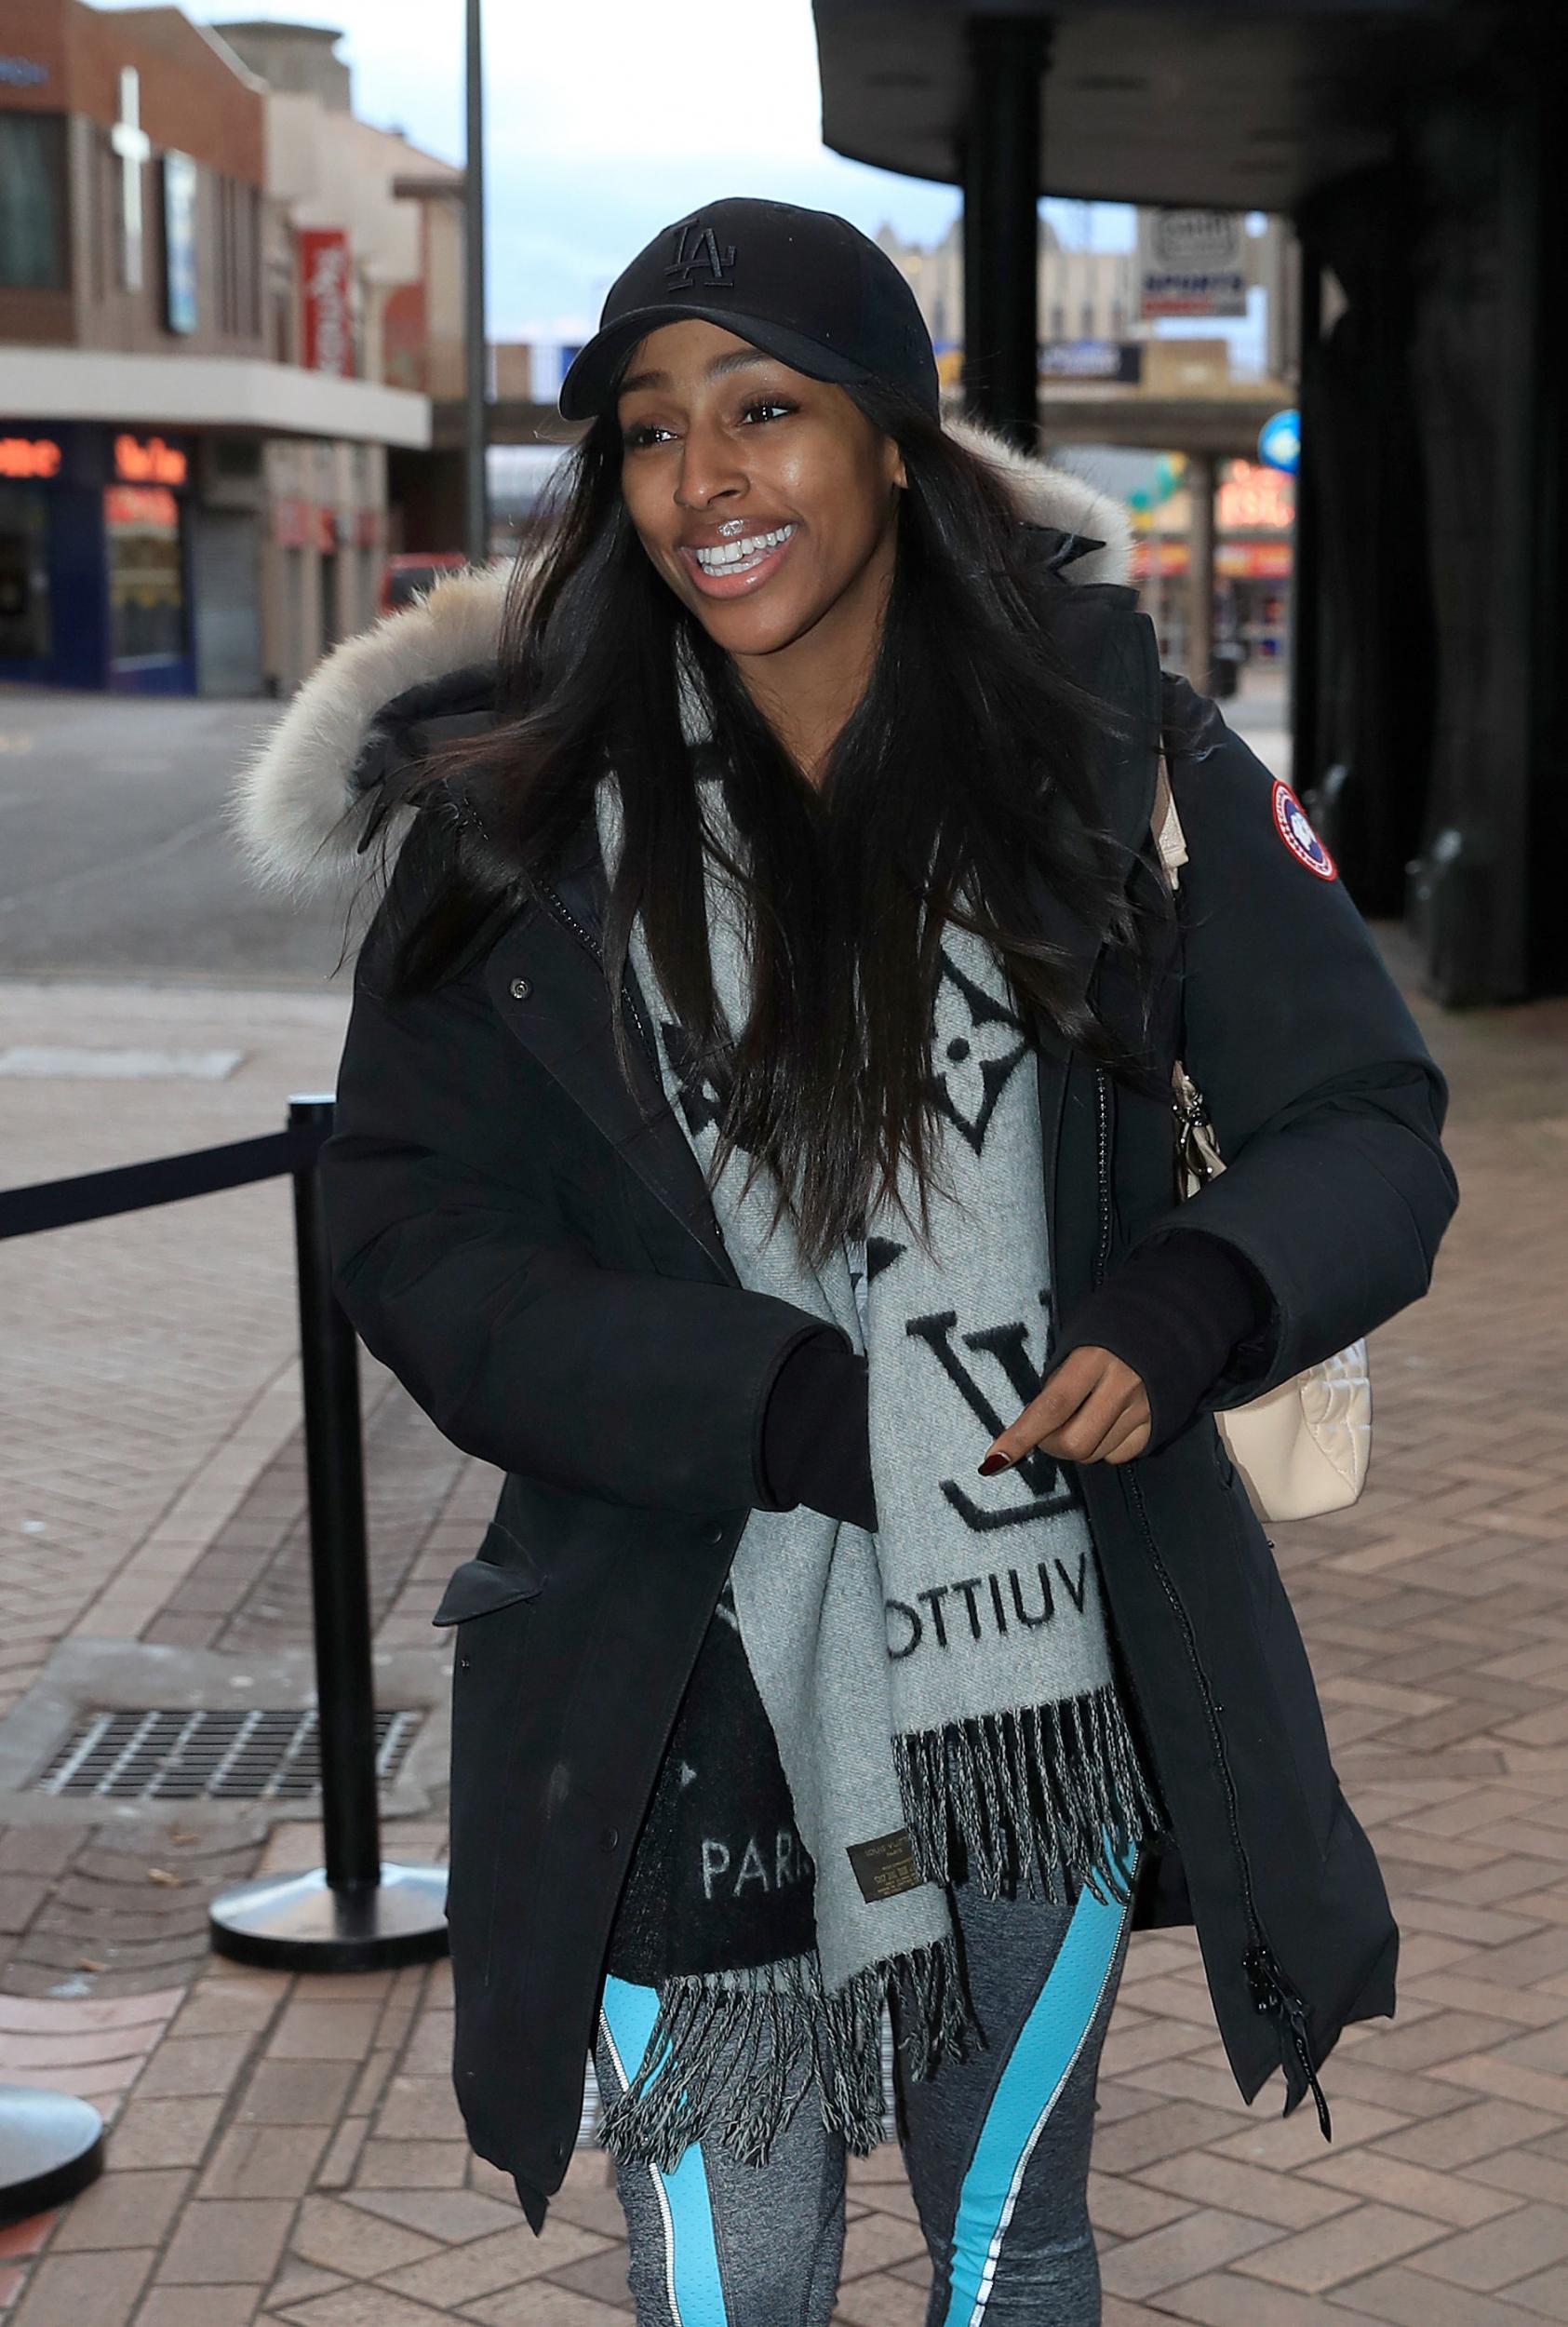 &#13;
Singer Alexandra Burke wore a Canada Goose jacket that features North African Coyote fur on its hood&#13;